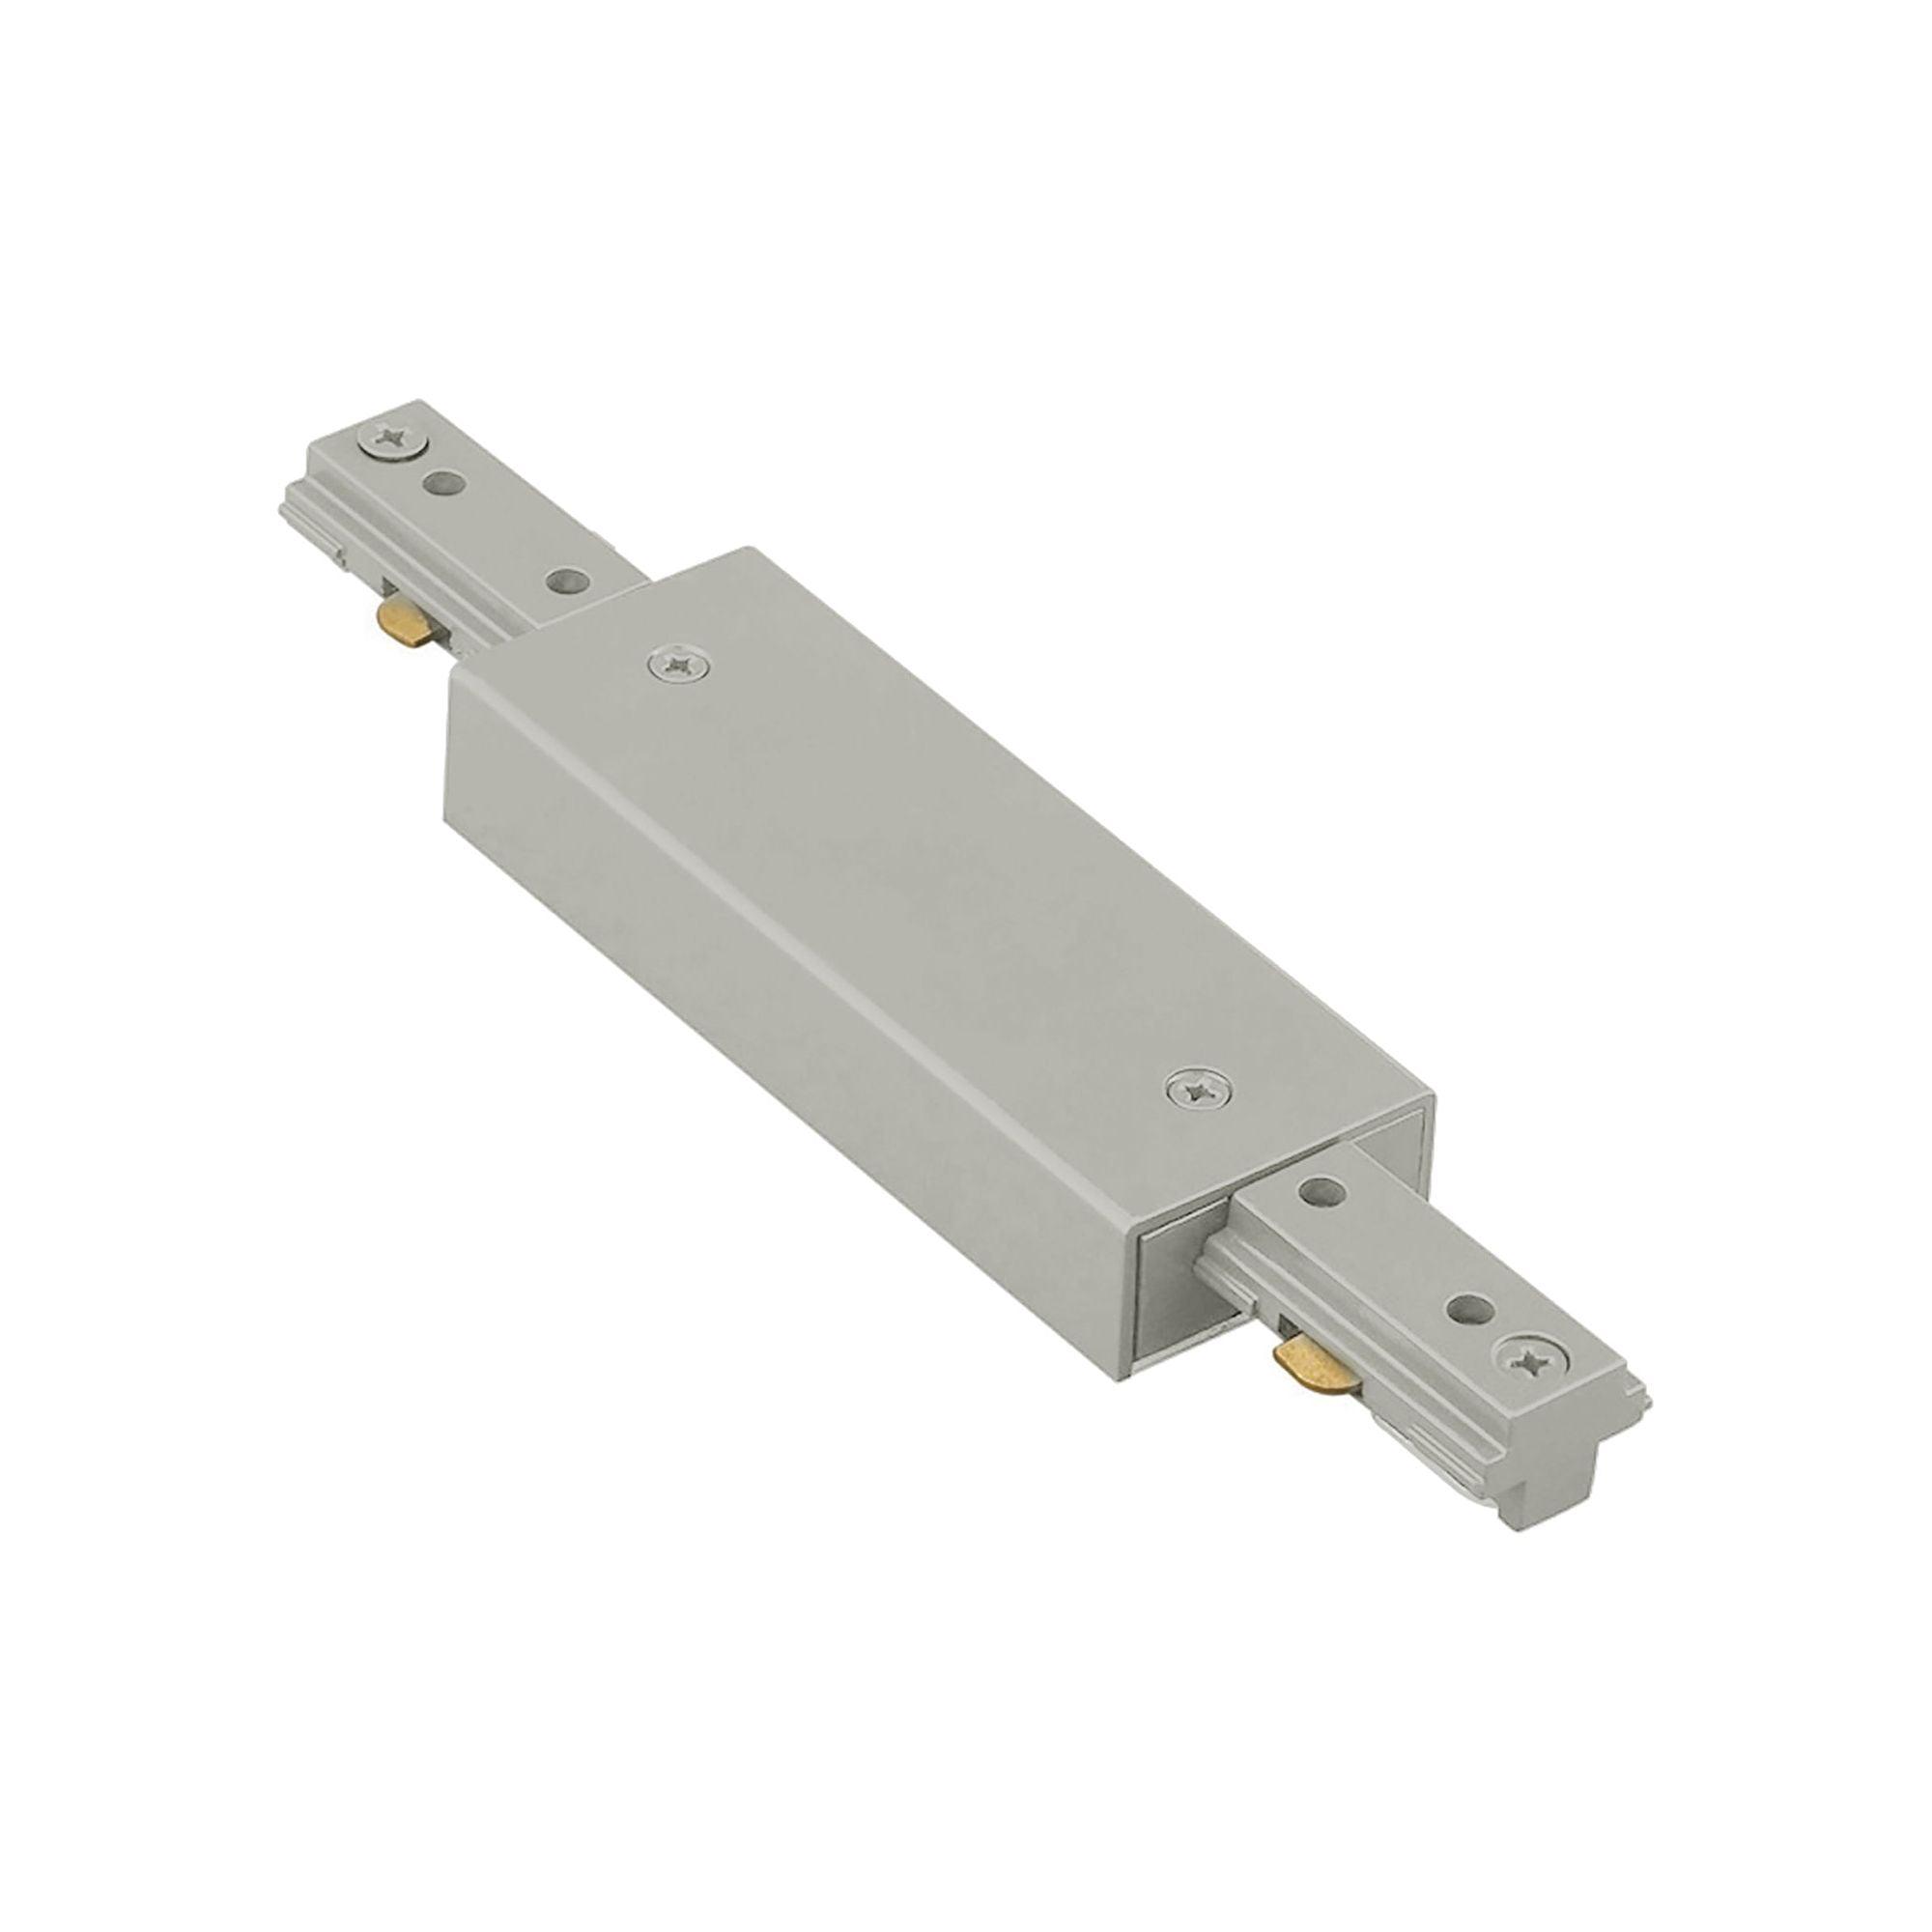 WAC Lighting - H Track Power Feedable "I" Connector - Lights Canada